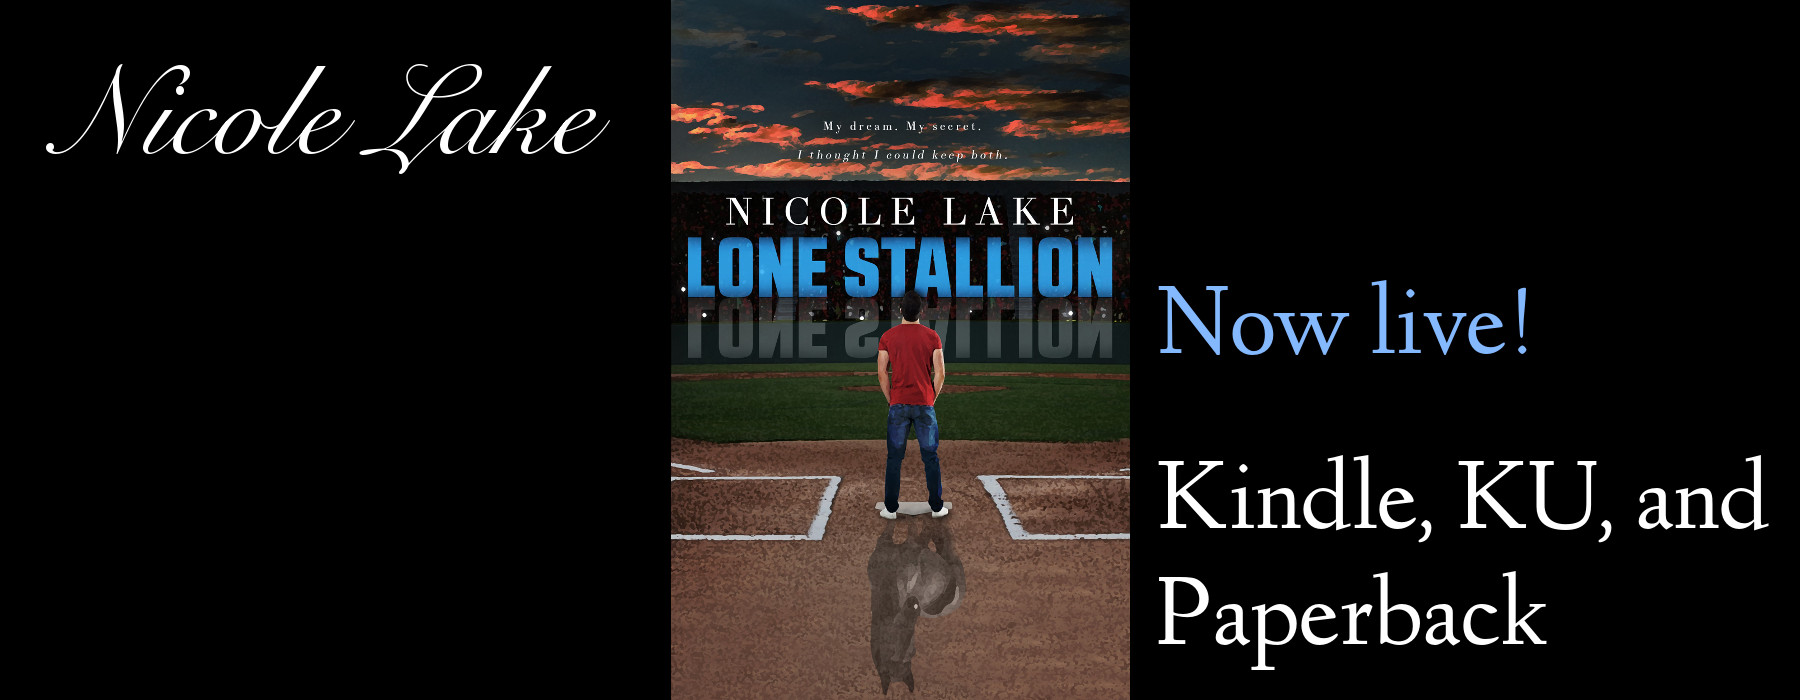 Lone Stallion is now live on Kindle, KU, and paperback!